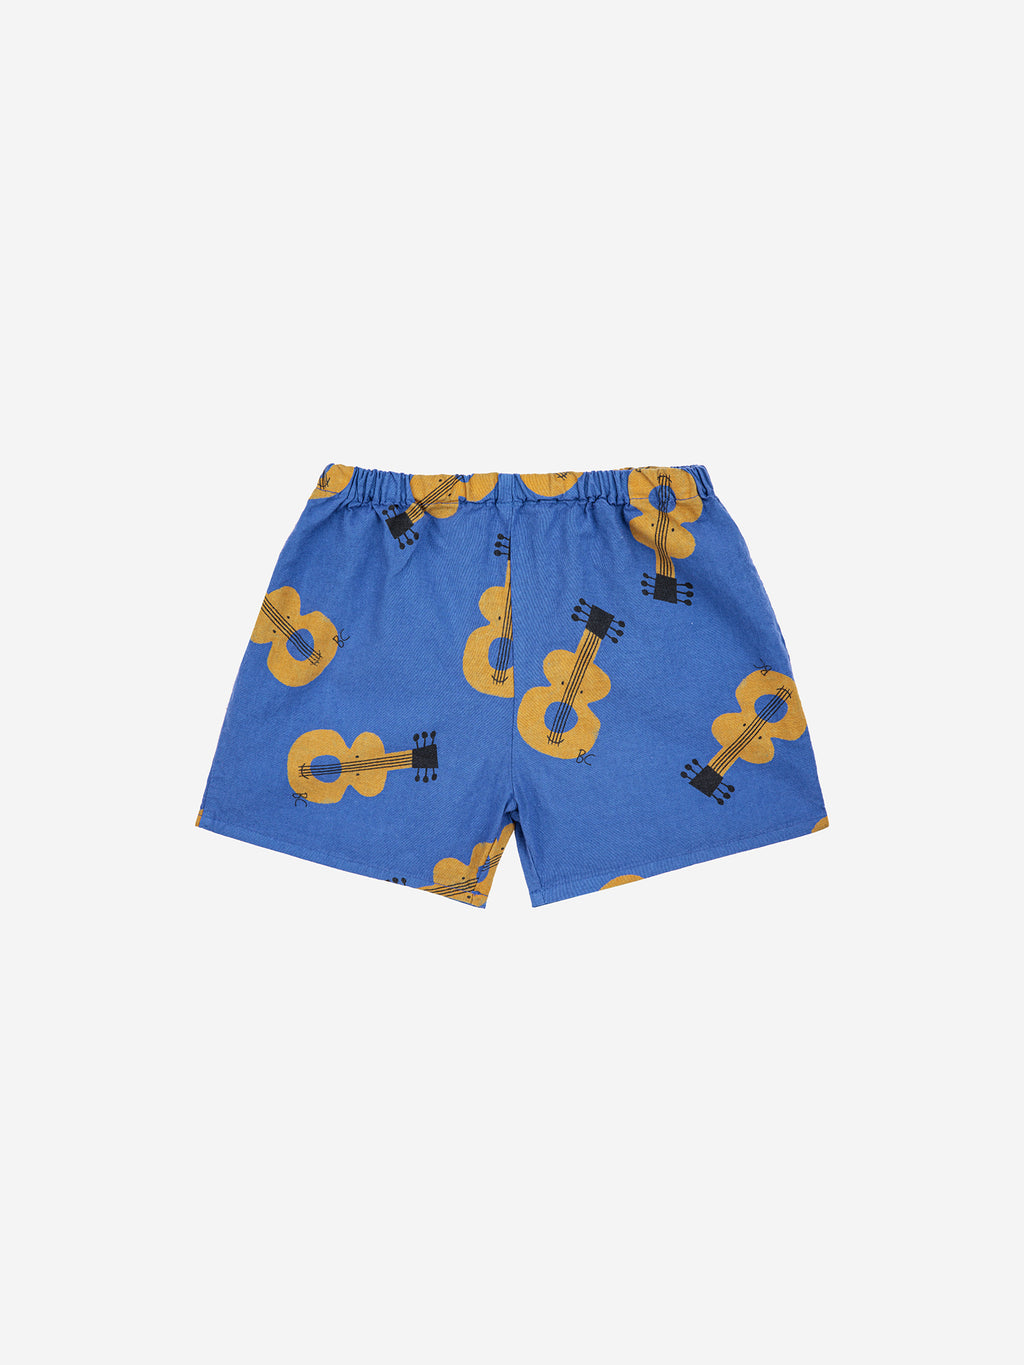 Bobo Choses Baby Acoustic Guitar All Over Woven Shorts - Navy Blue